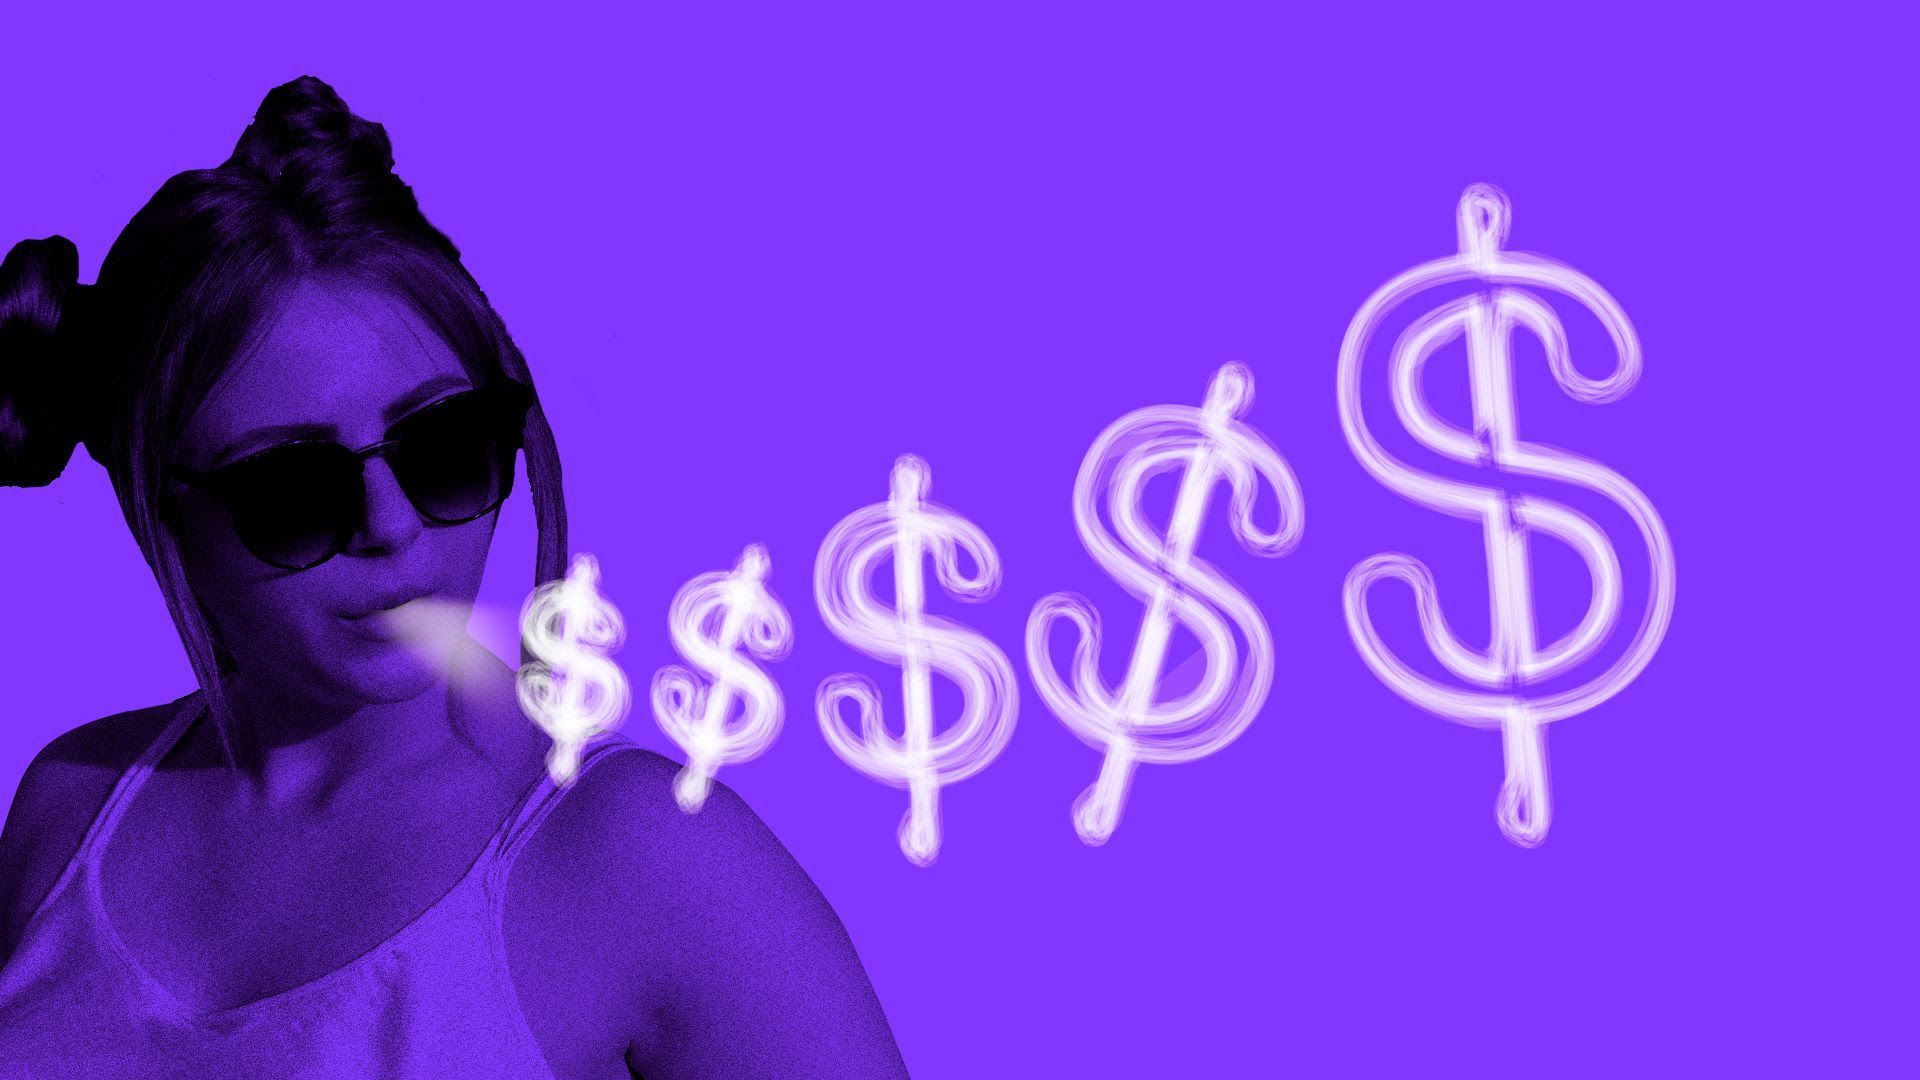 Illustration of a woman puffing out dollar signs after vaping.